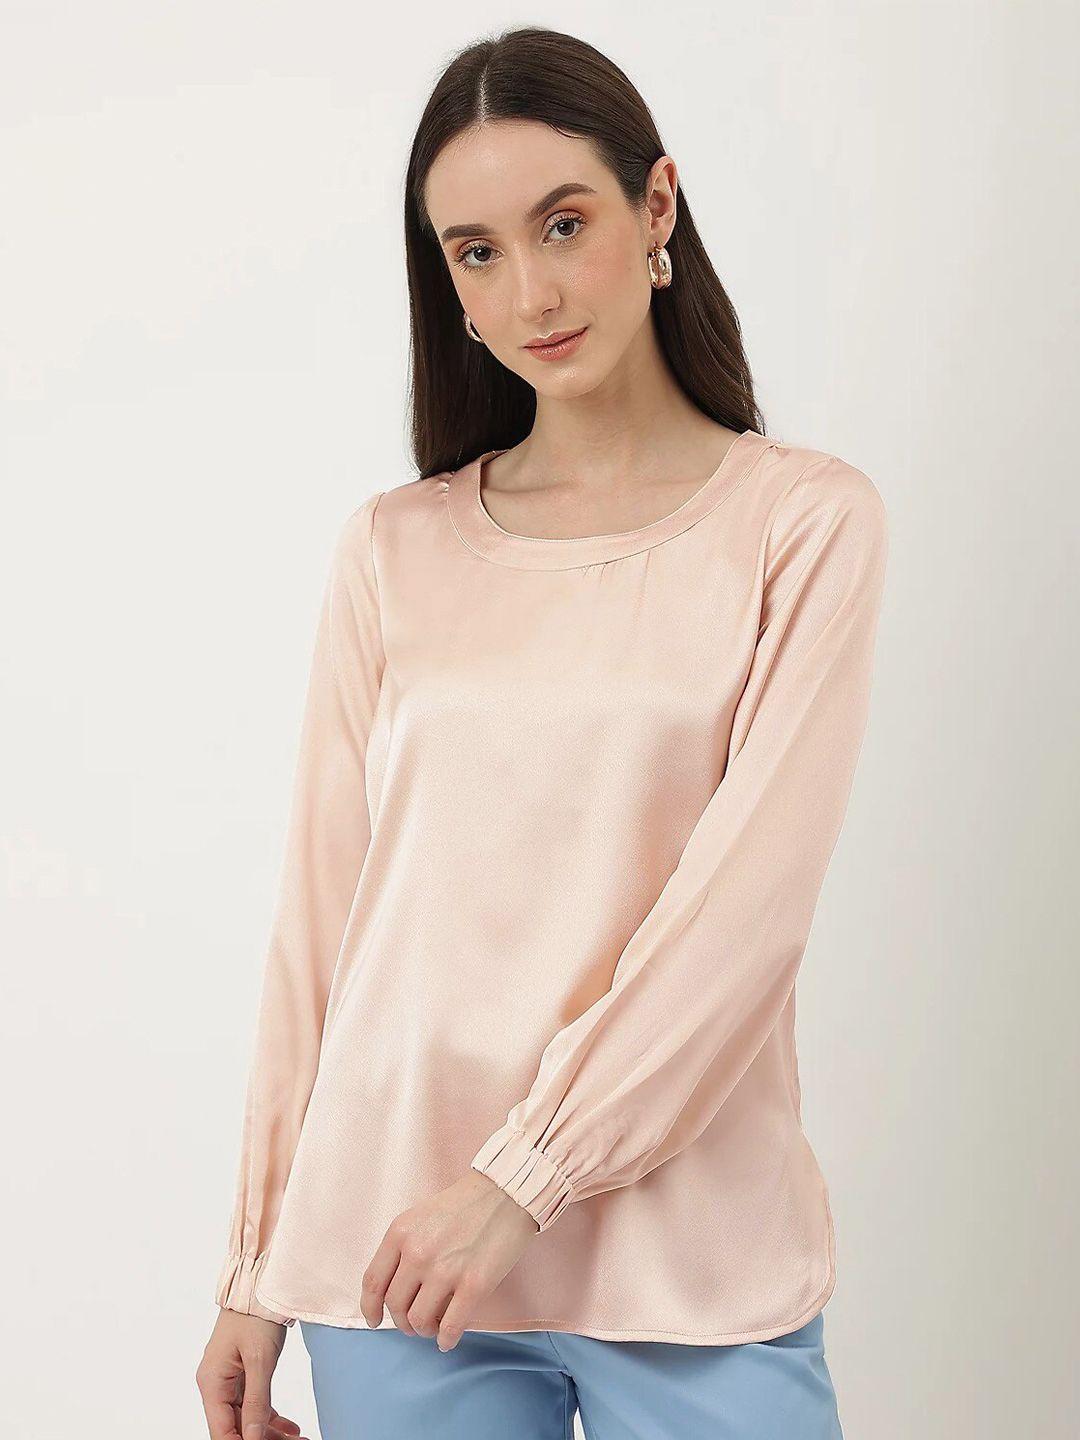 marks & spencer puff sleeves top